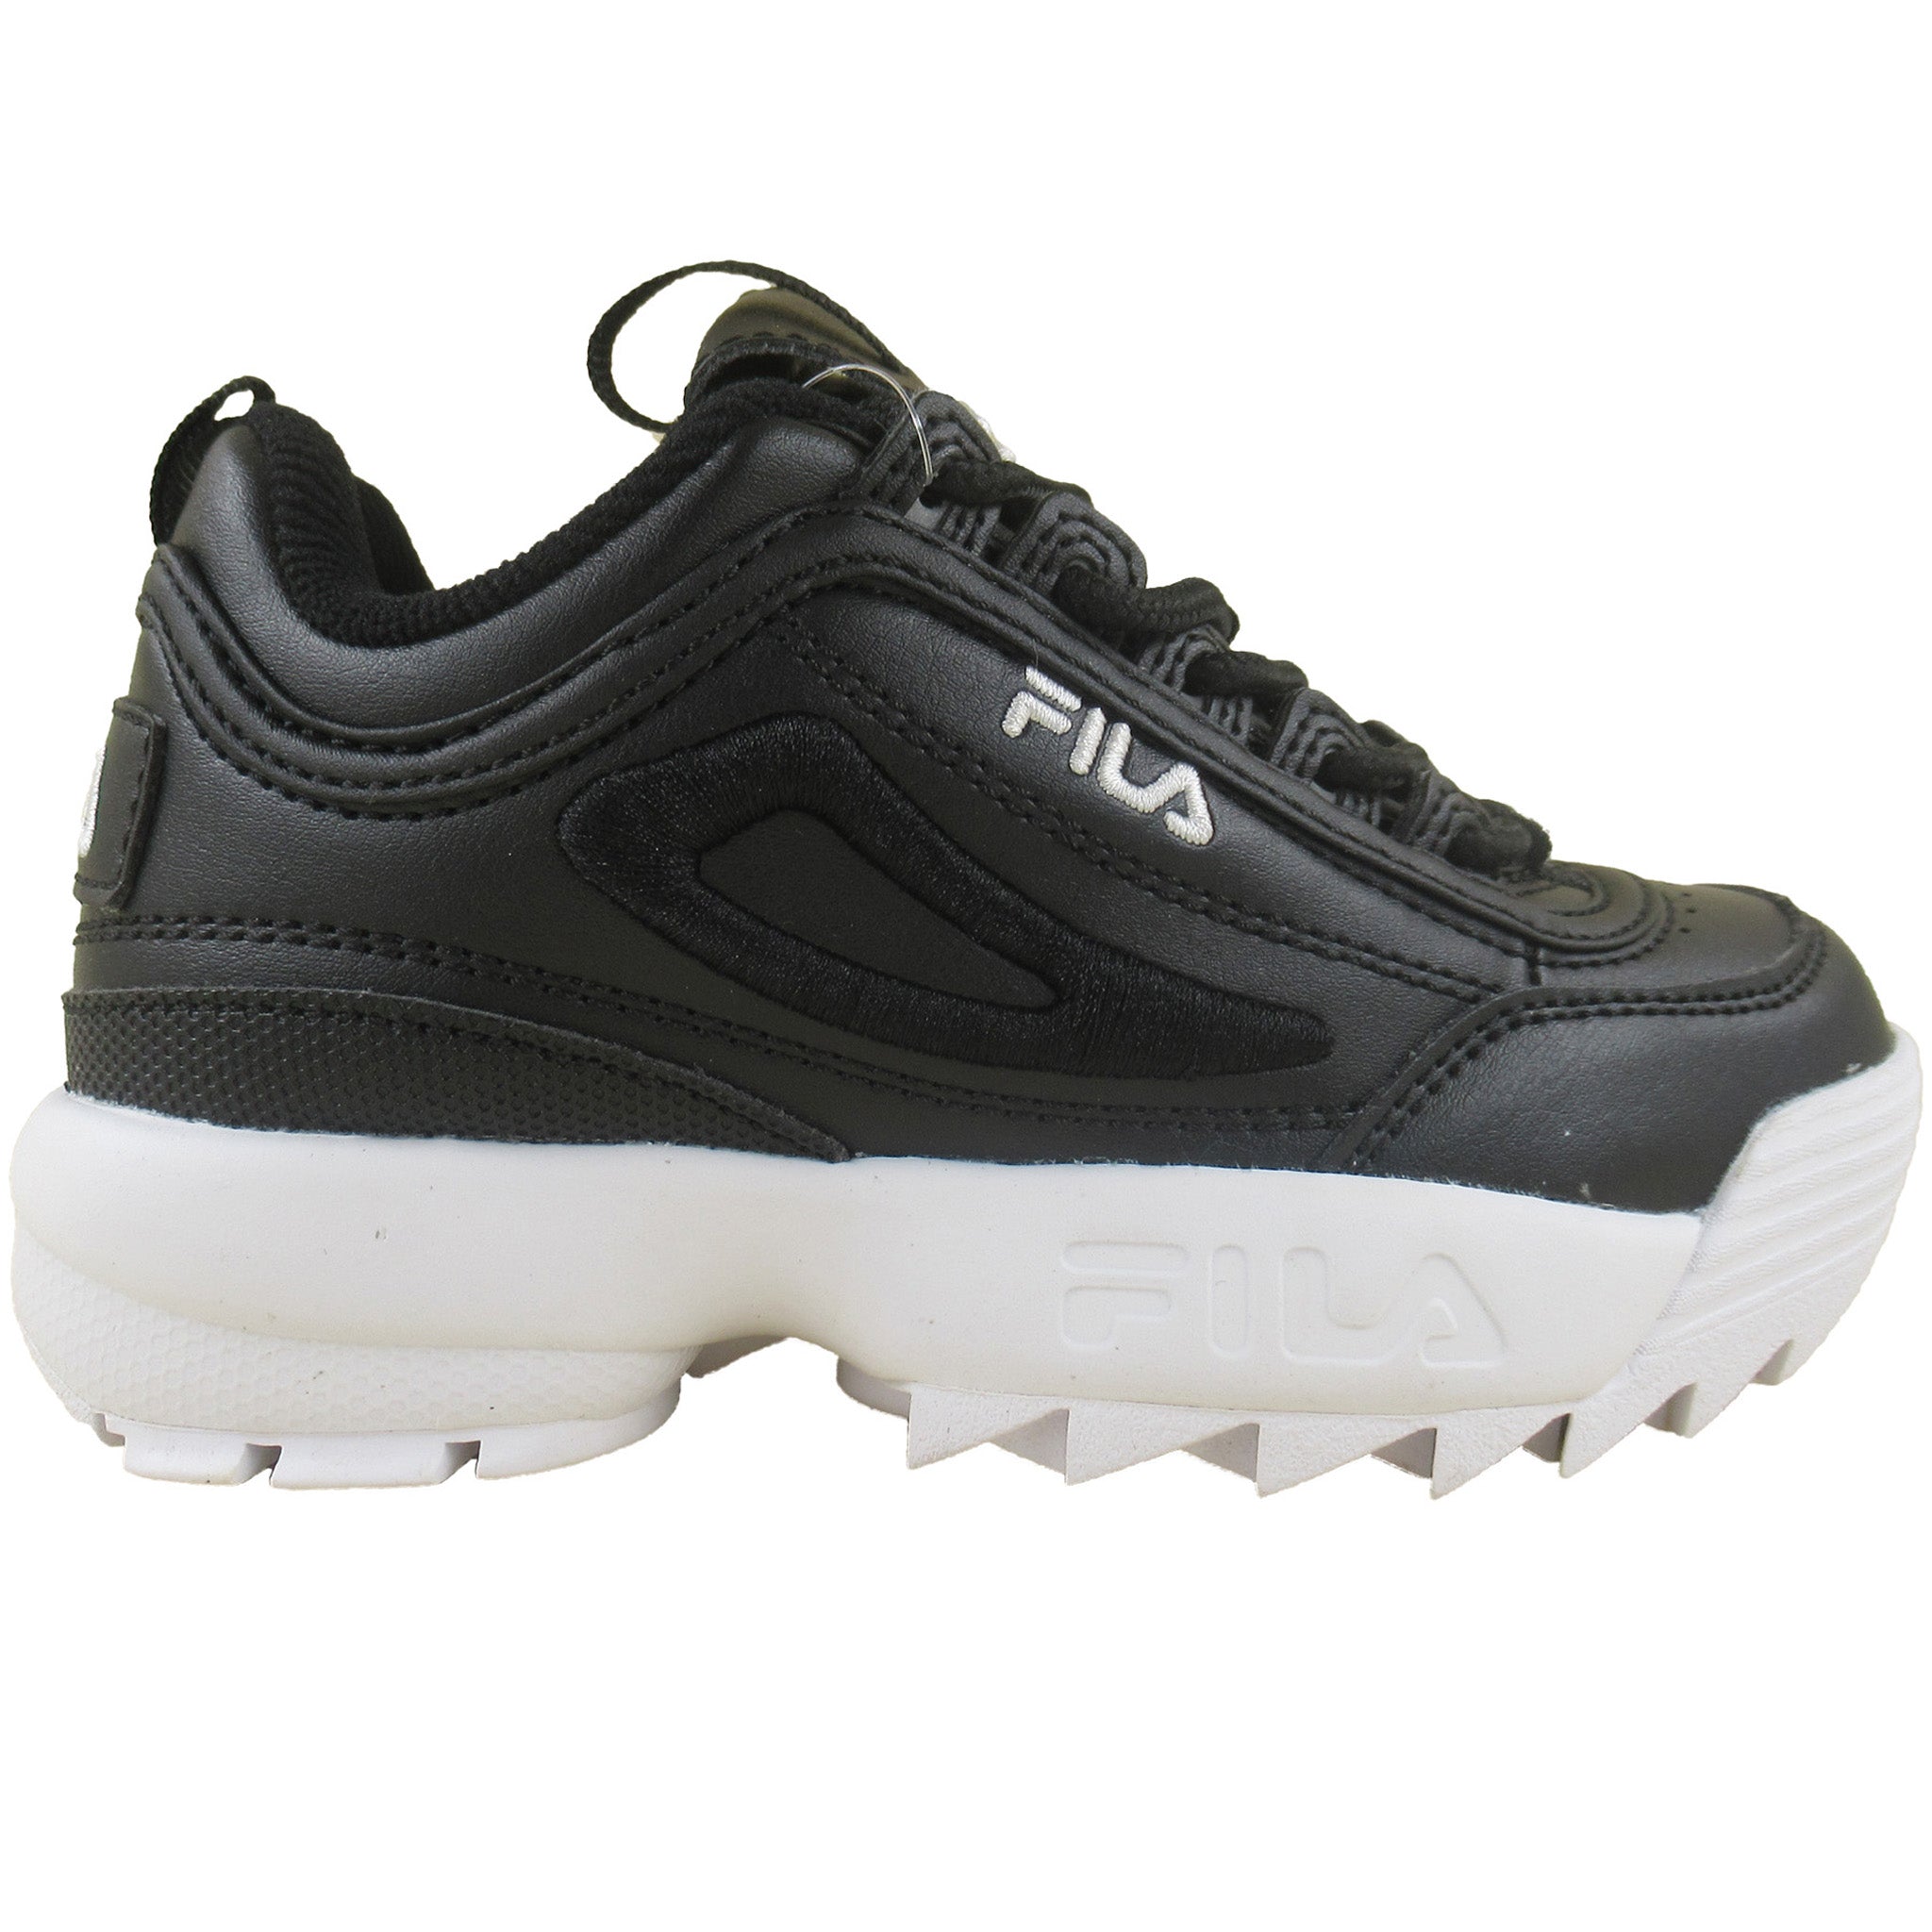 Fila Little Kid/Big Kid Disruptor II 3D Embroidery – That and More